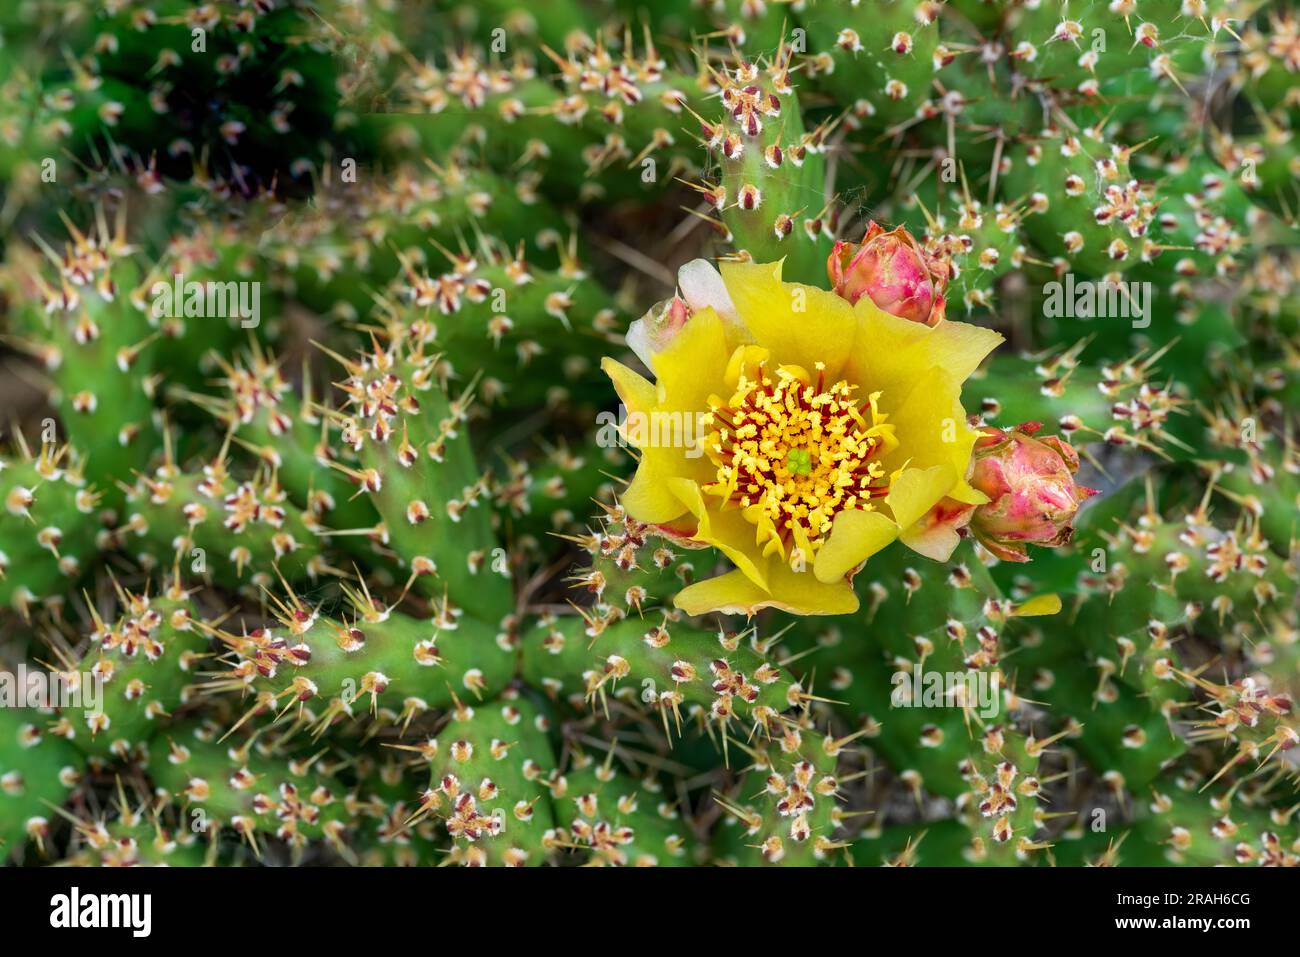 The small prickly pear cactus blooming on a plant found in Mt. Nebo, Manitoba, Canada. Stock Photo